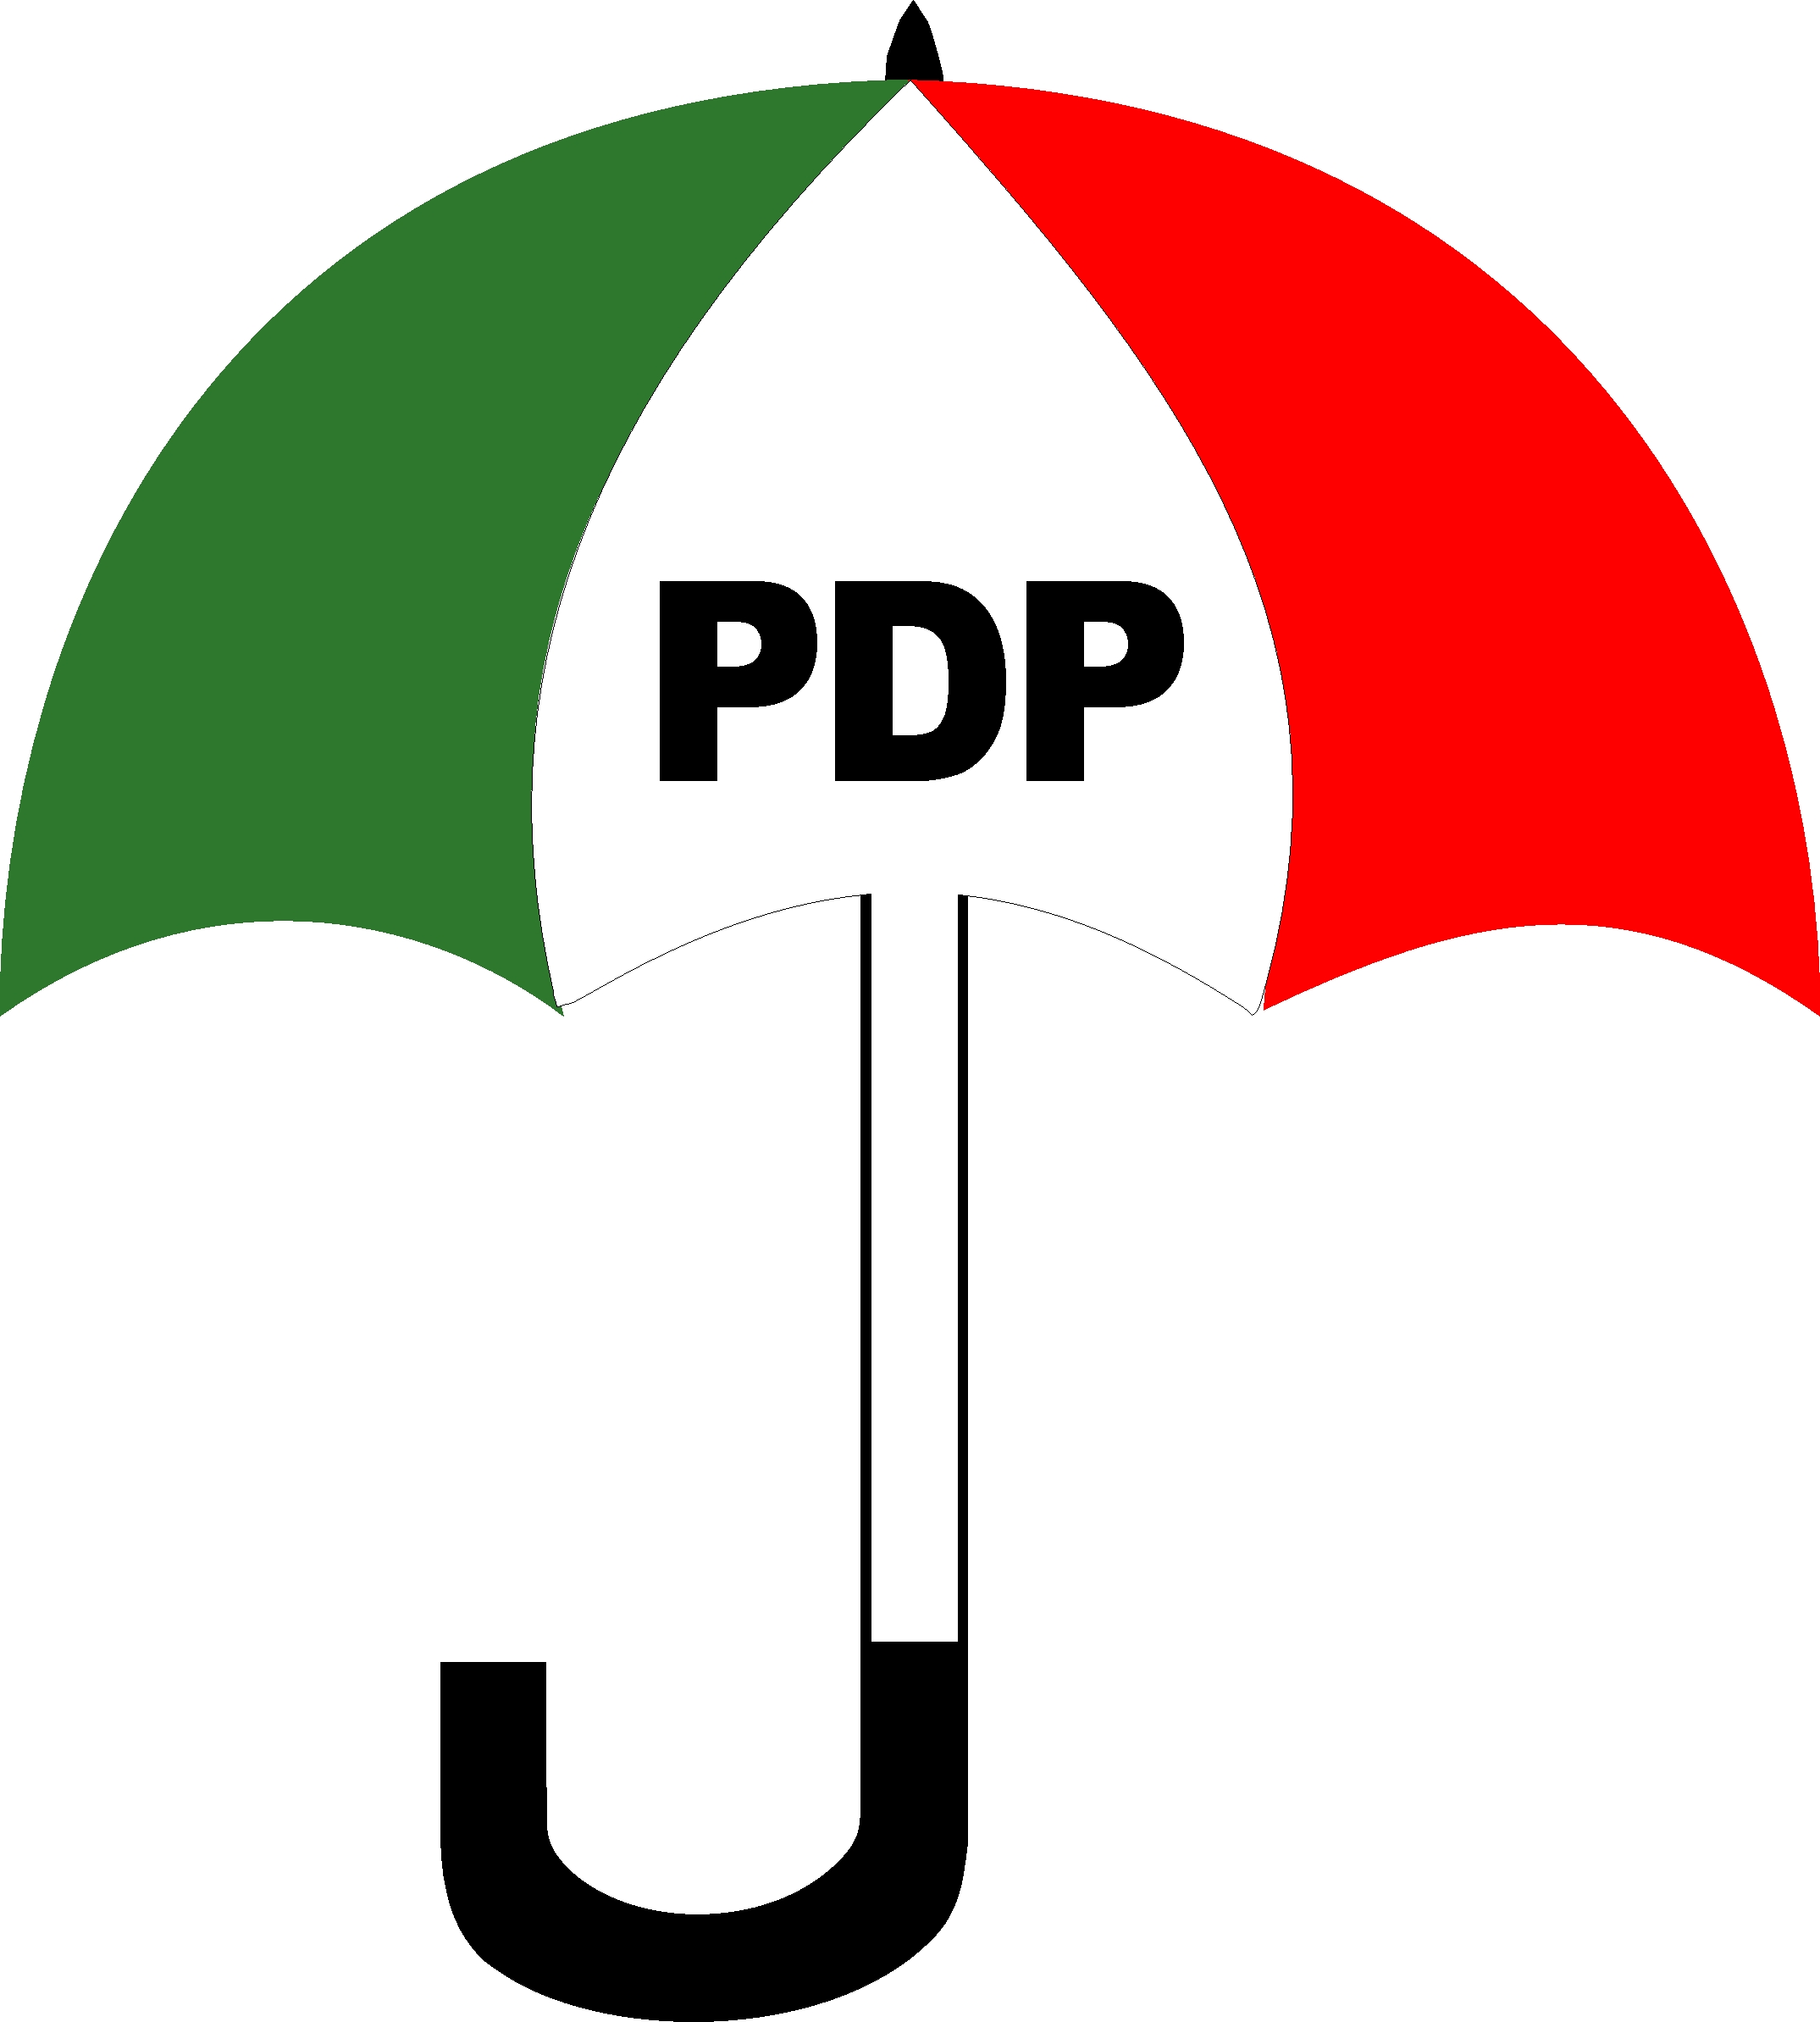 244 PDP Aspirants Jostle For 68 Elective Positions In Lagos